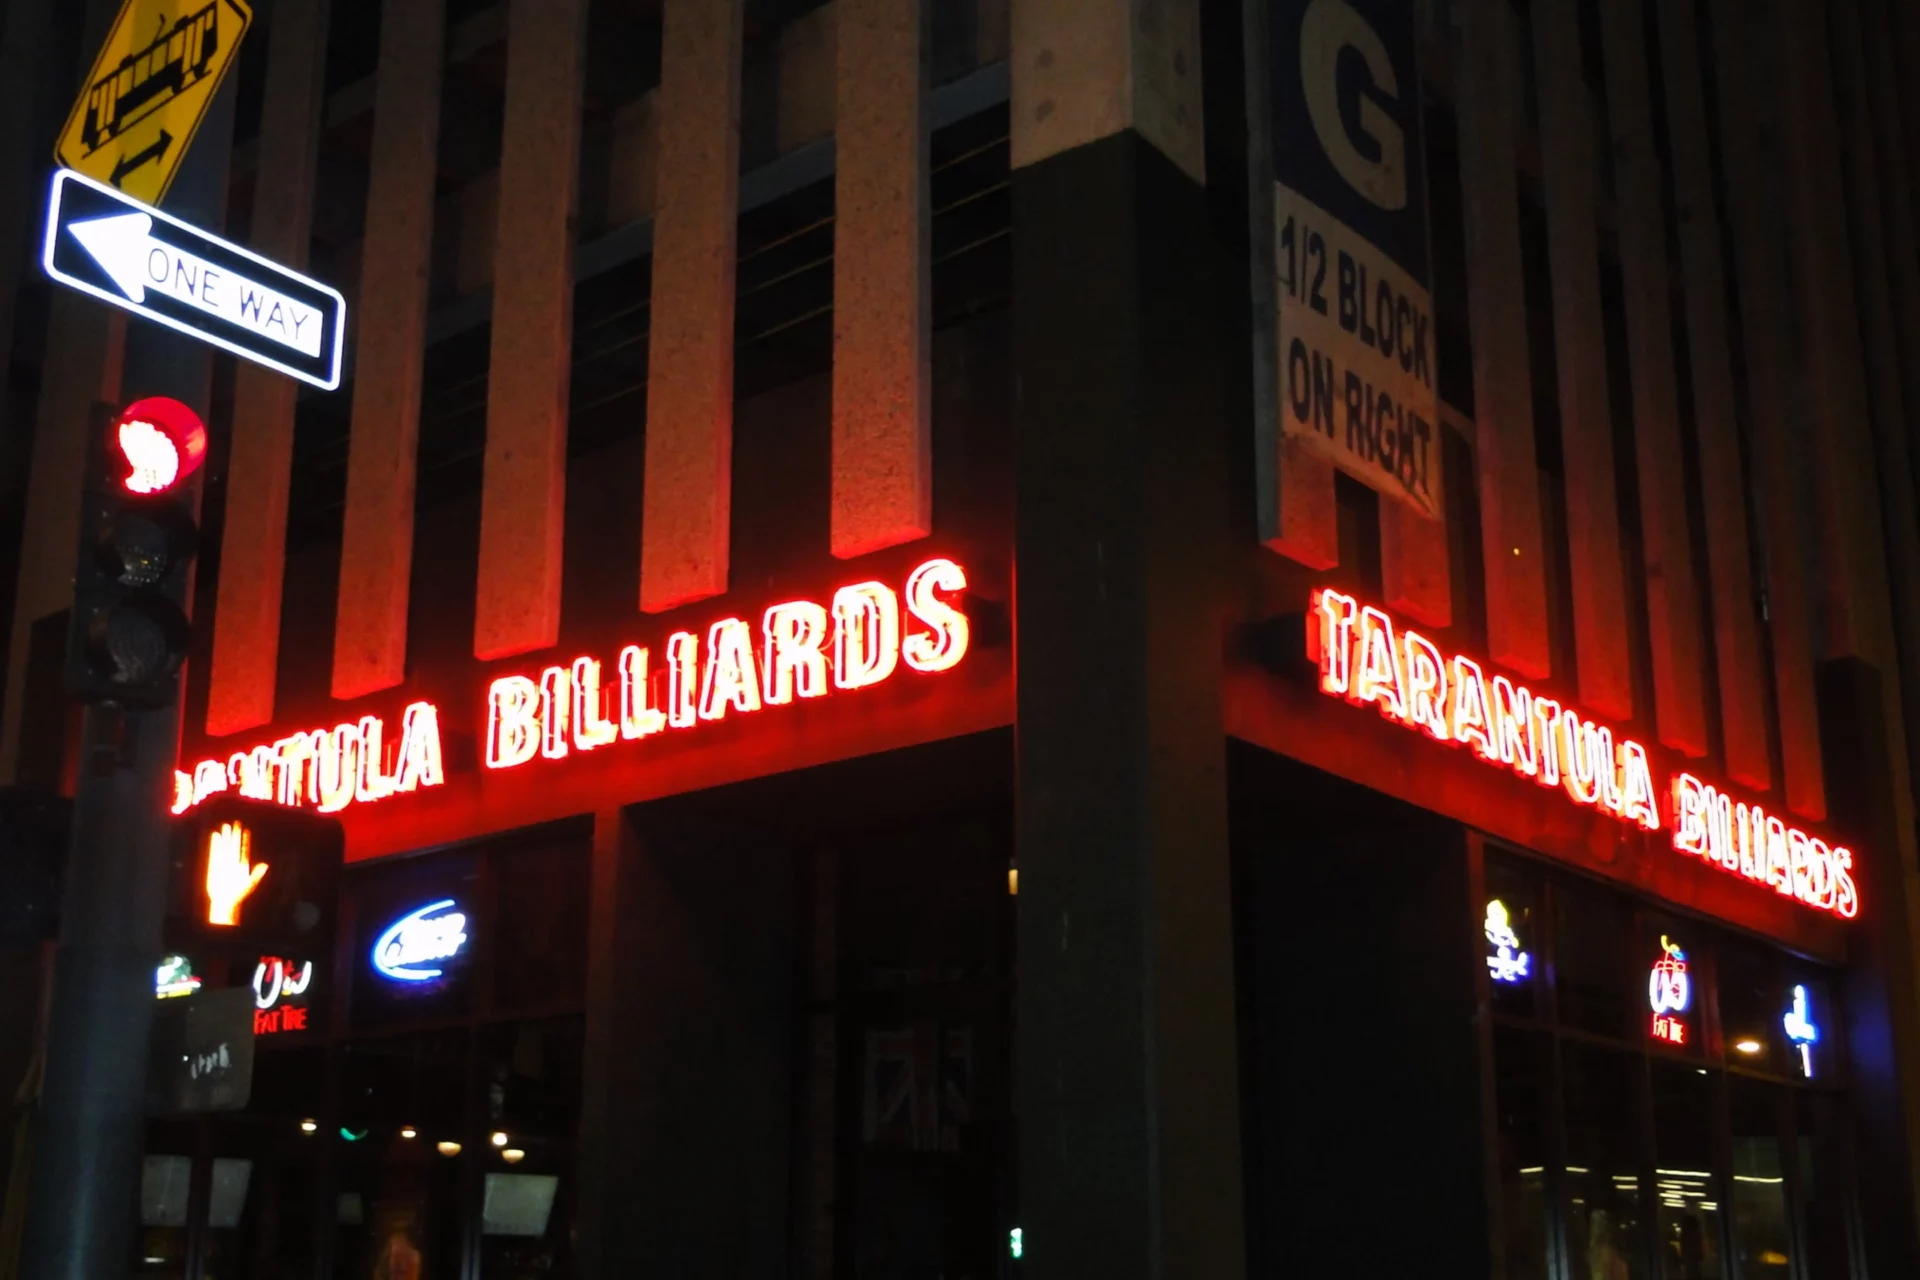 A neon sign is lit up on the side of a building.